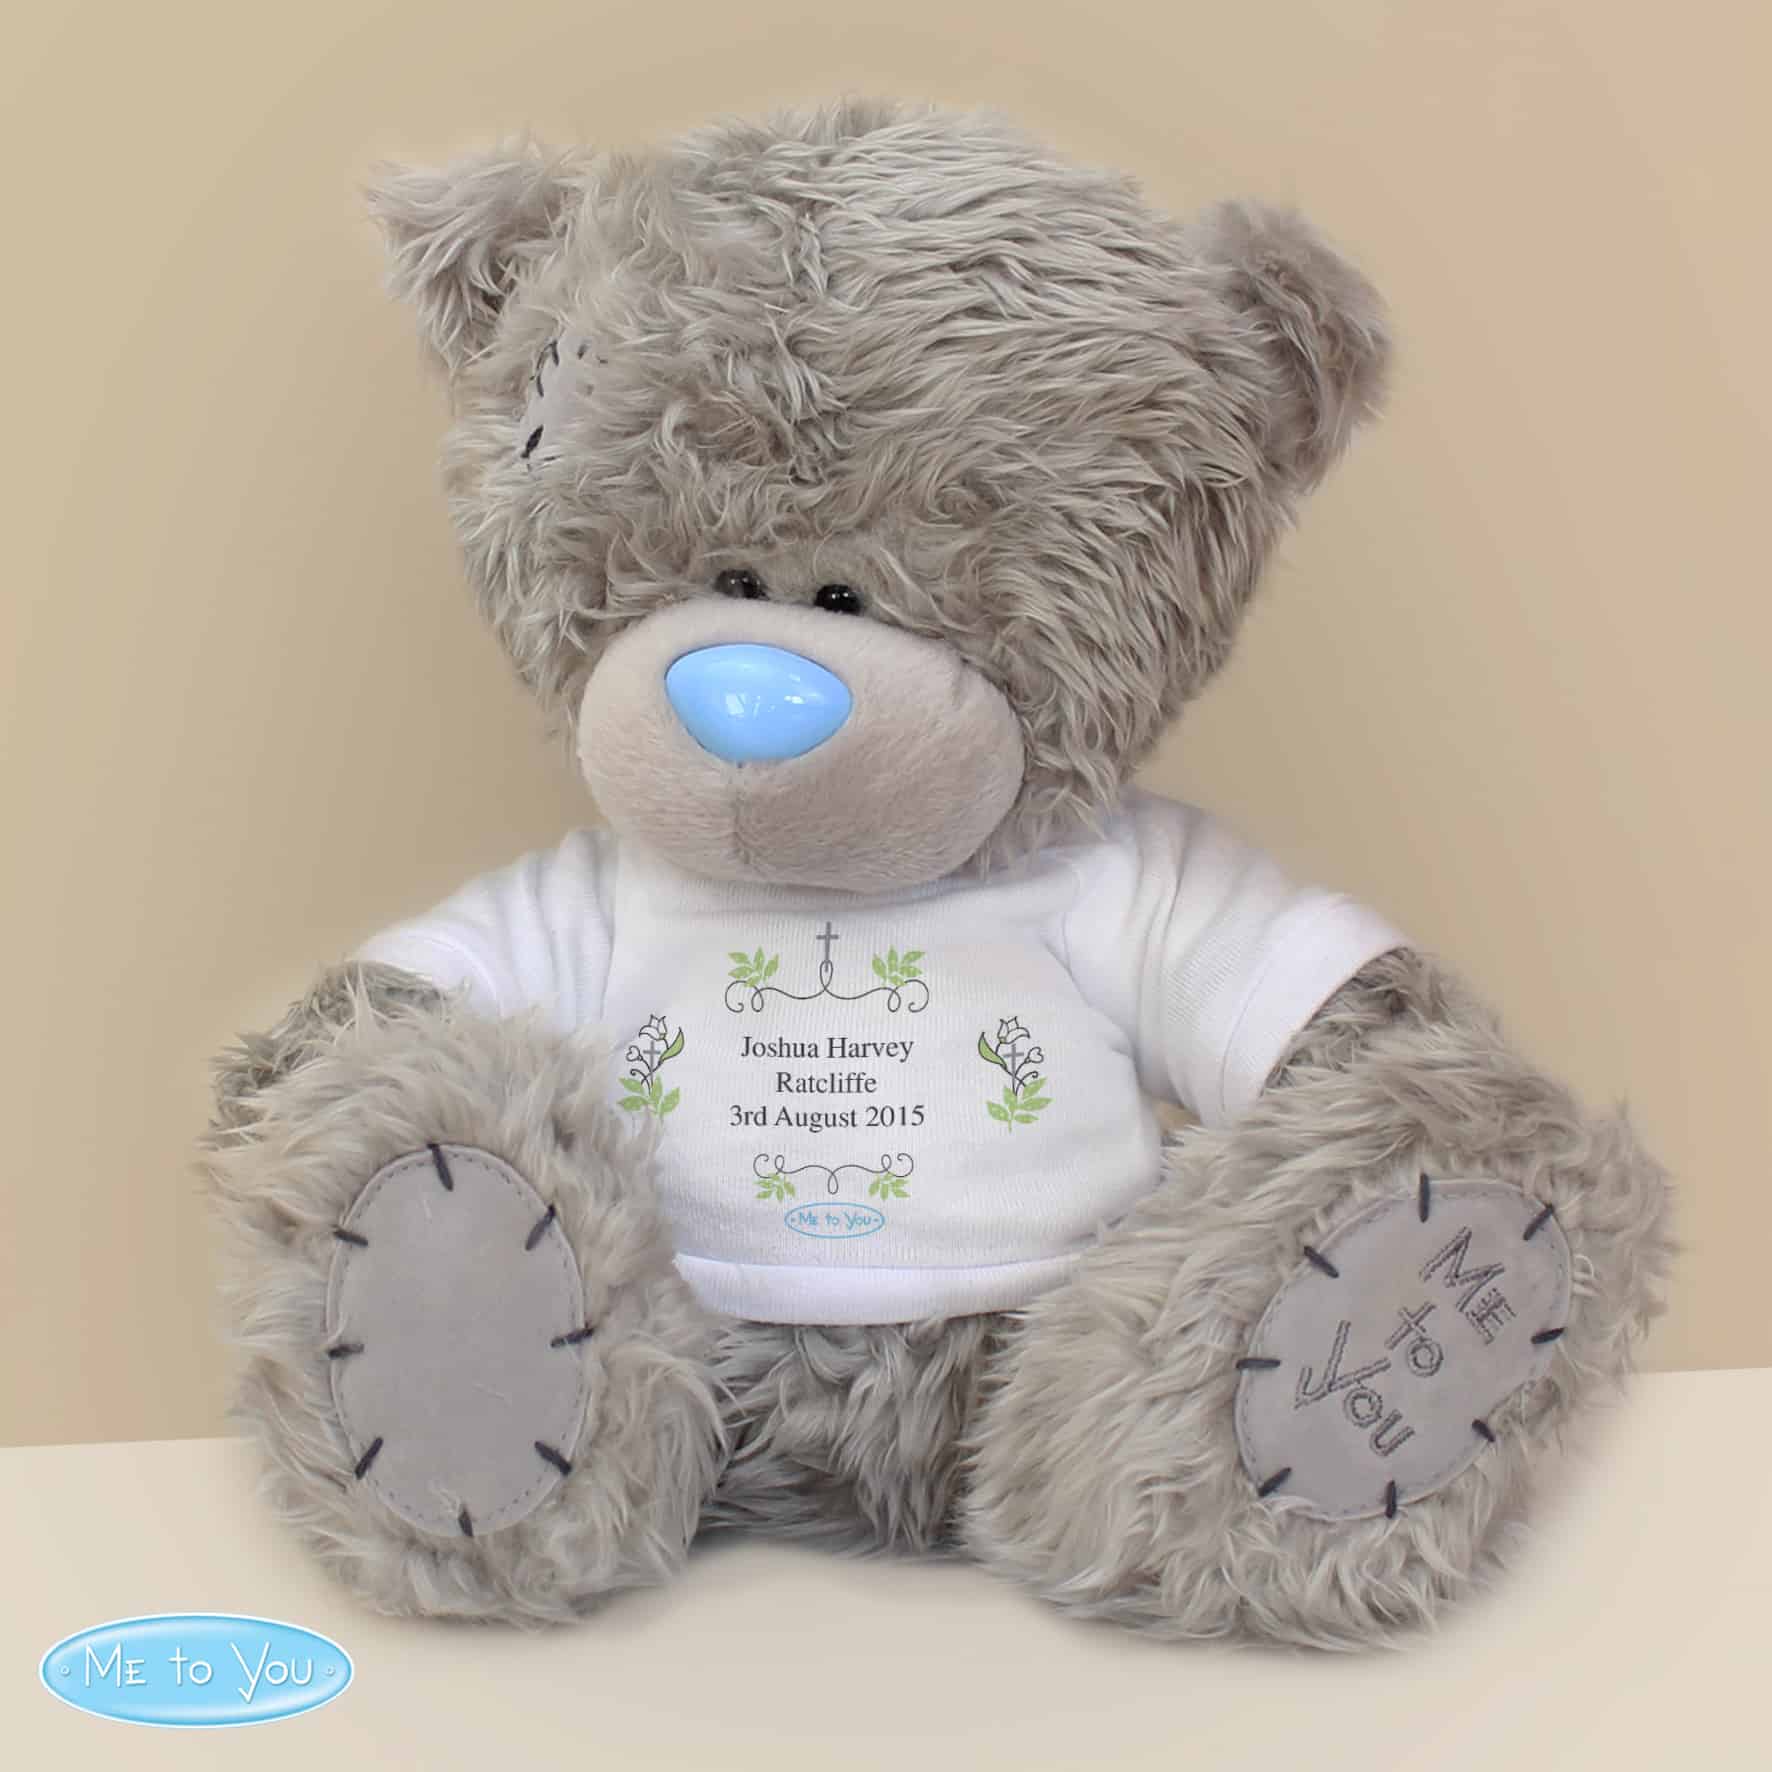 Me To You Religious Teddy Bear. Any message over 3 lines can be personalised on the teddy's white t-shirt. A great keepsake gift for a christening, baptism, holy communion, wedding etc from CalEli Gifts.